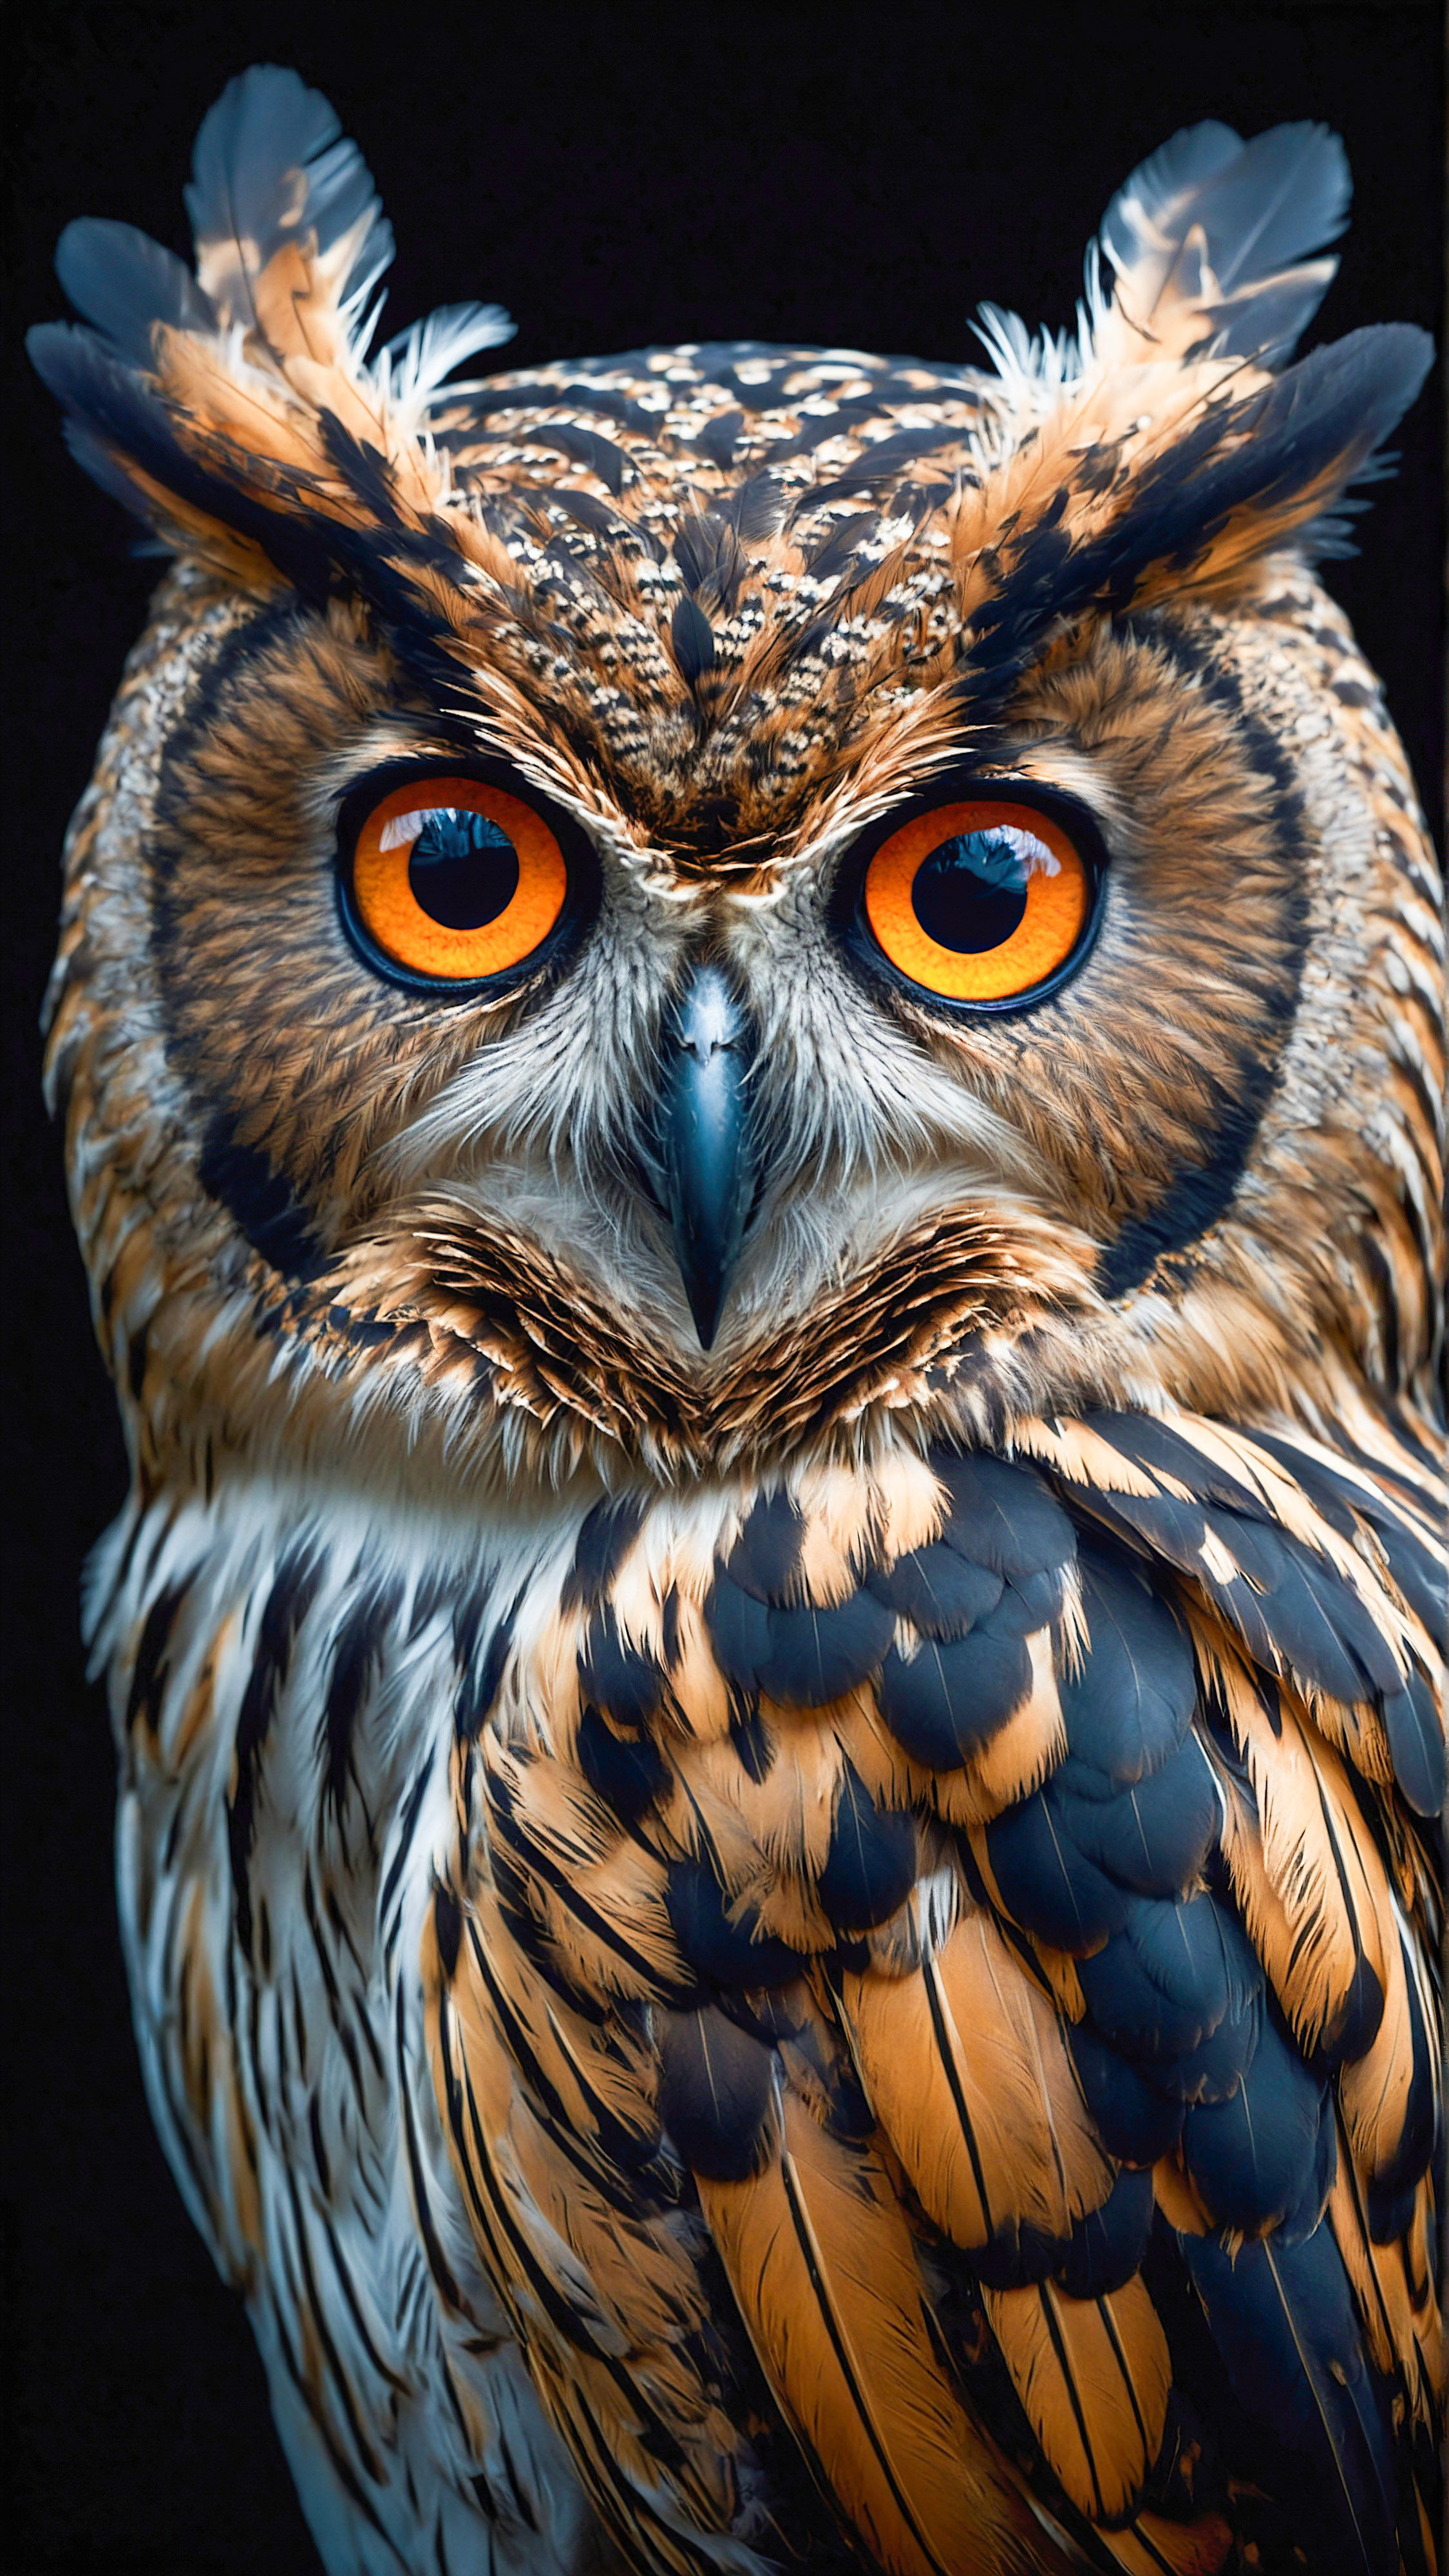 Adorn your home screen with our iPhone wallpaper, a detailed and artistic representation of an owl with glowing eyes, intricate feather patterns, and a dark, mysterious ambiance.